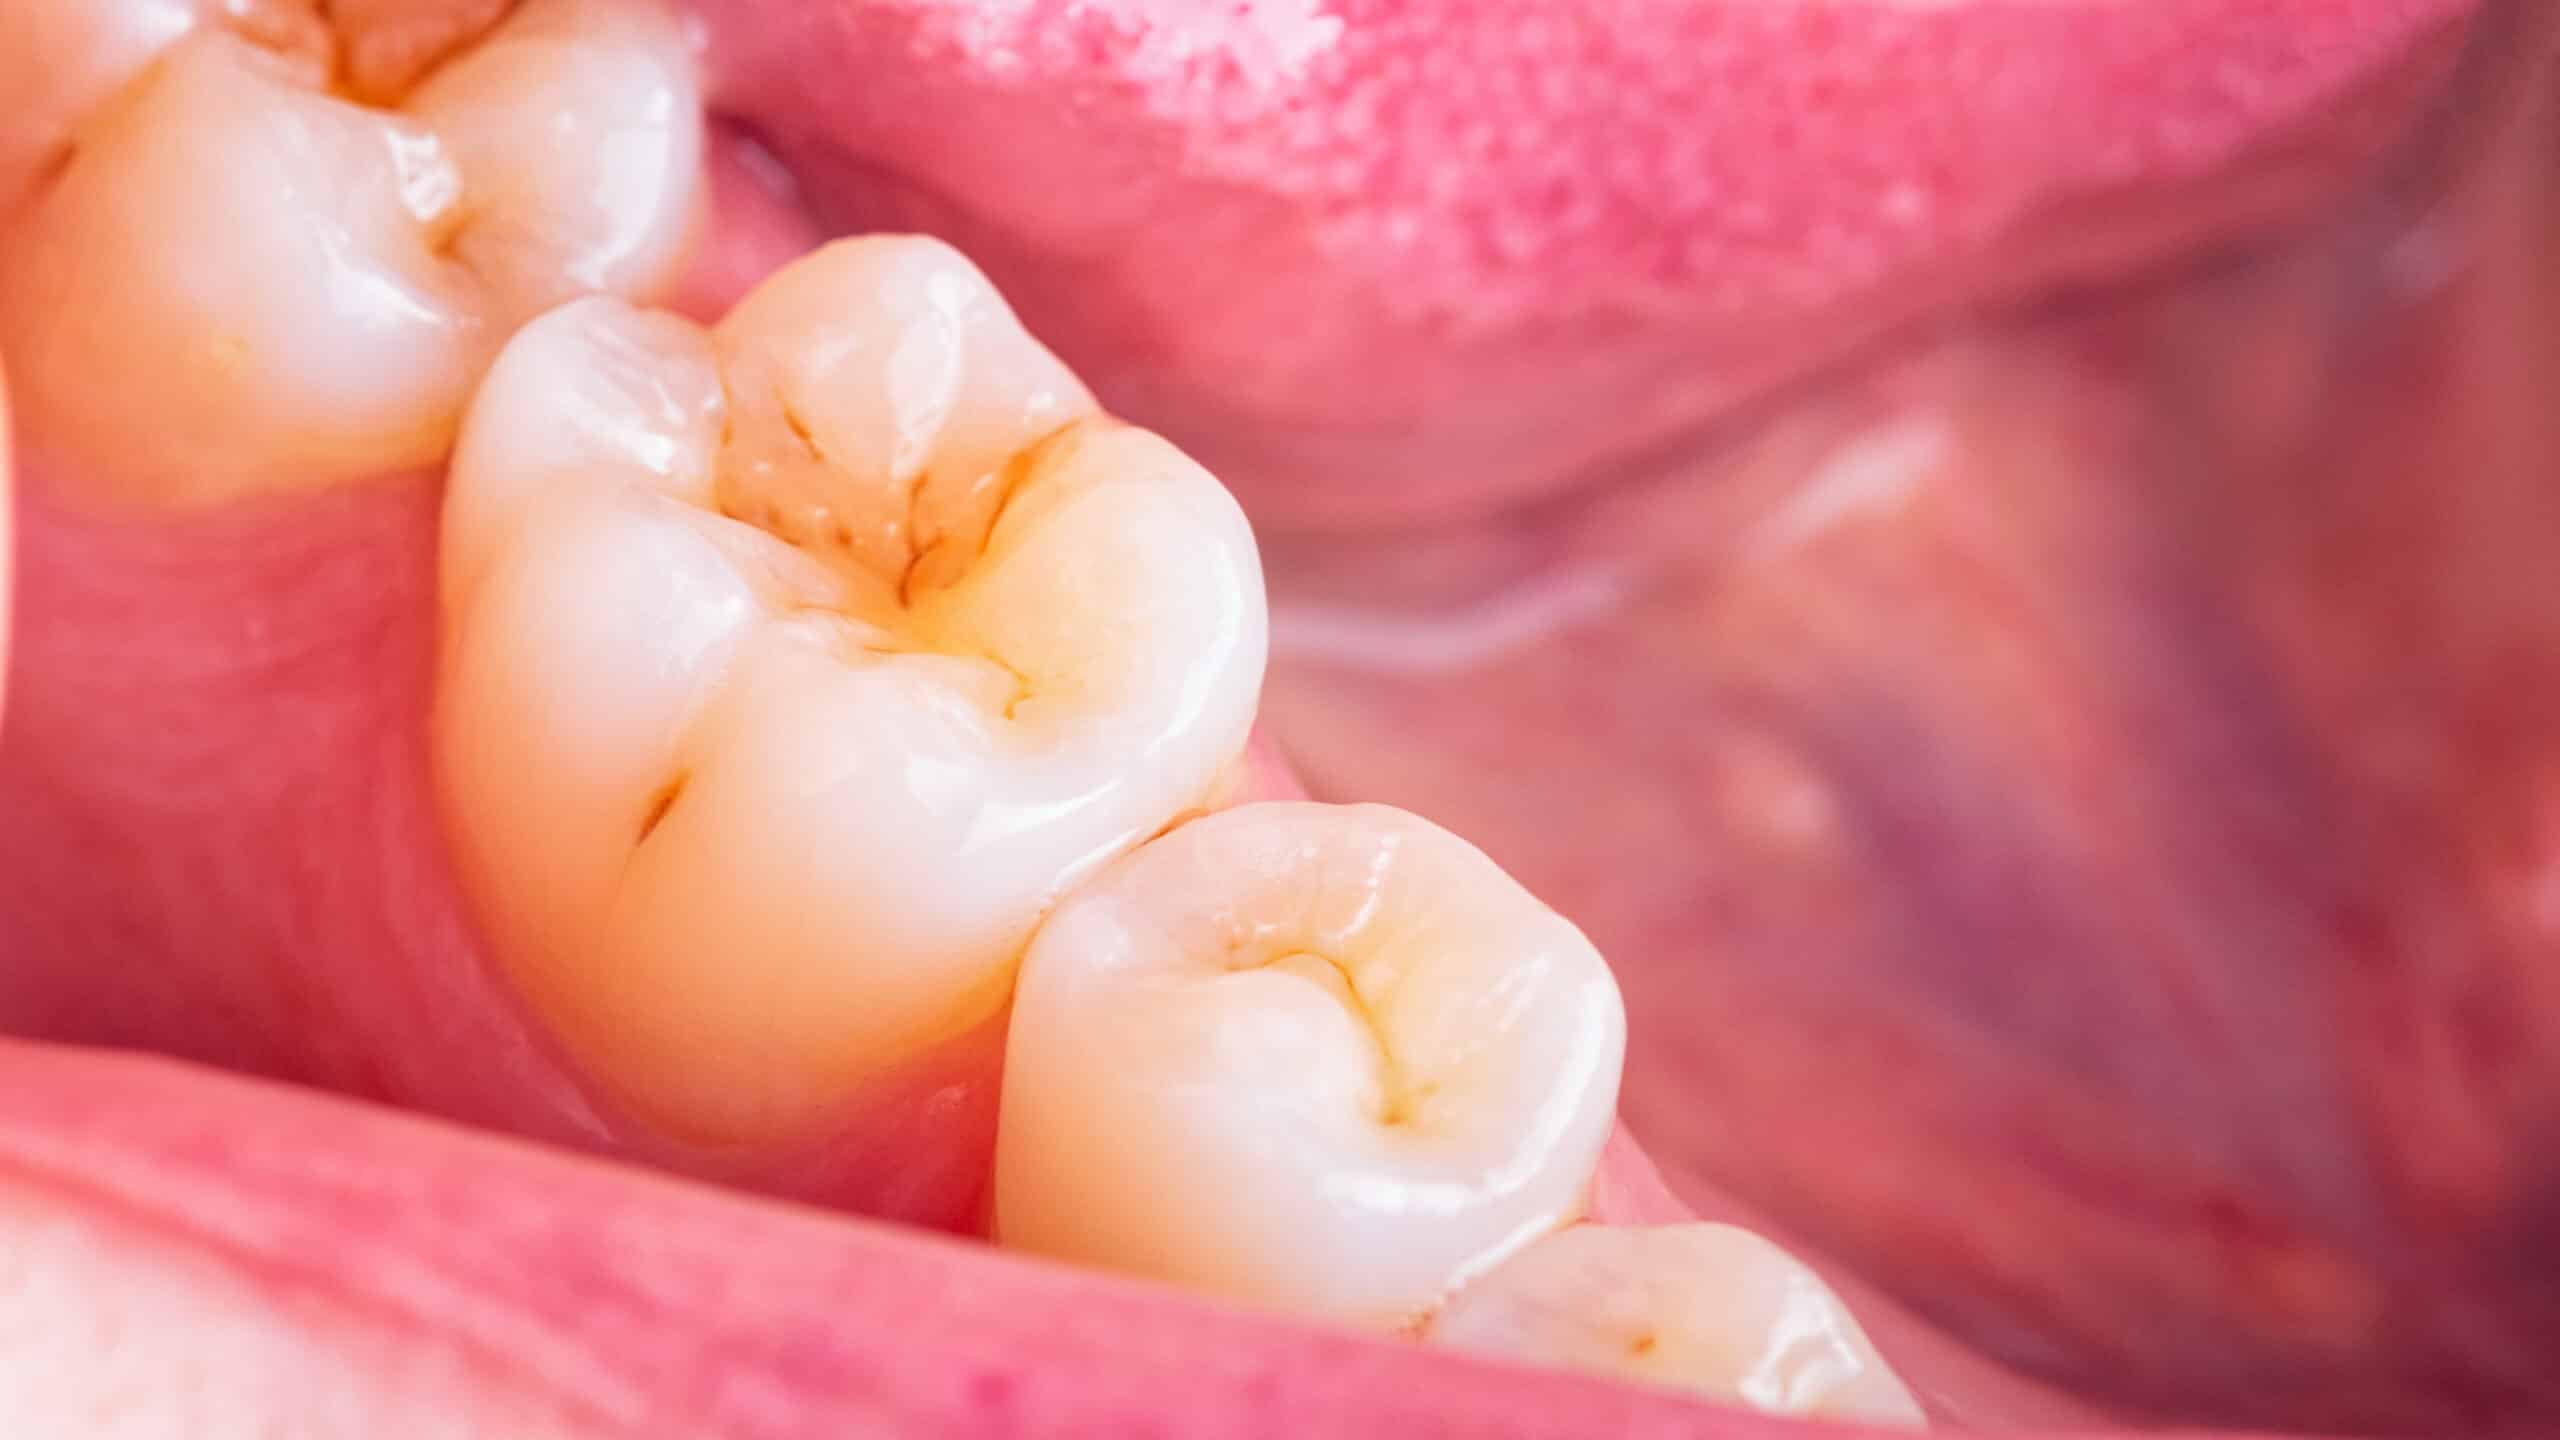 Plaque can harm teeth and cause cavities